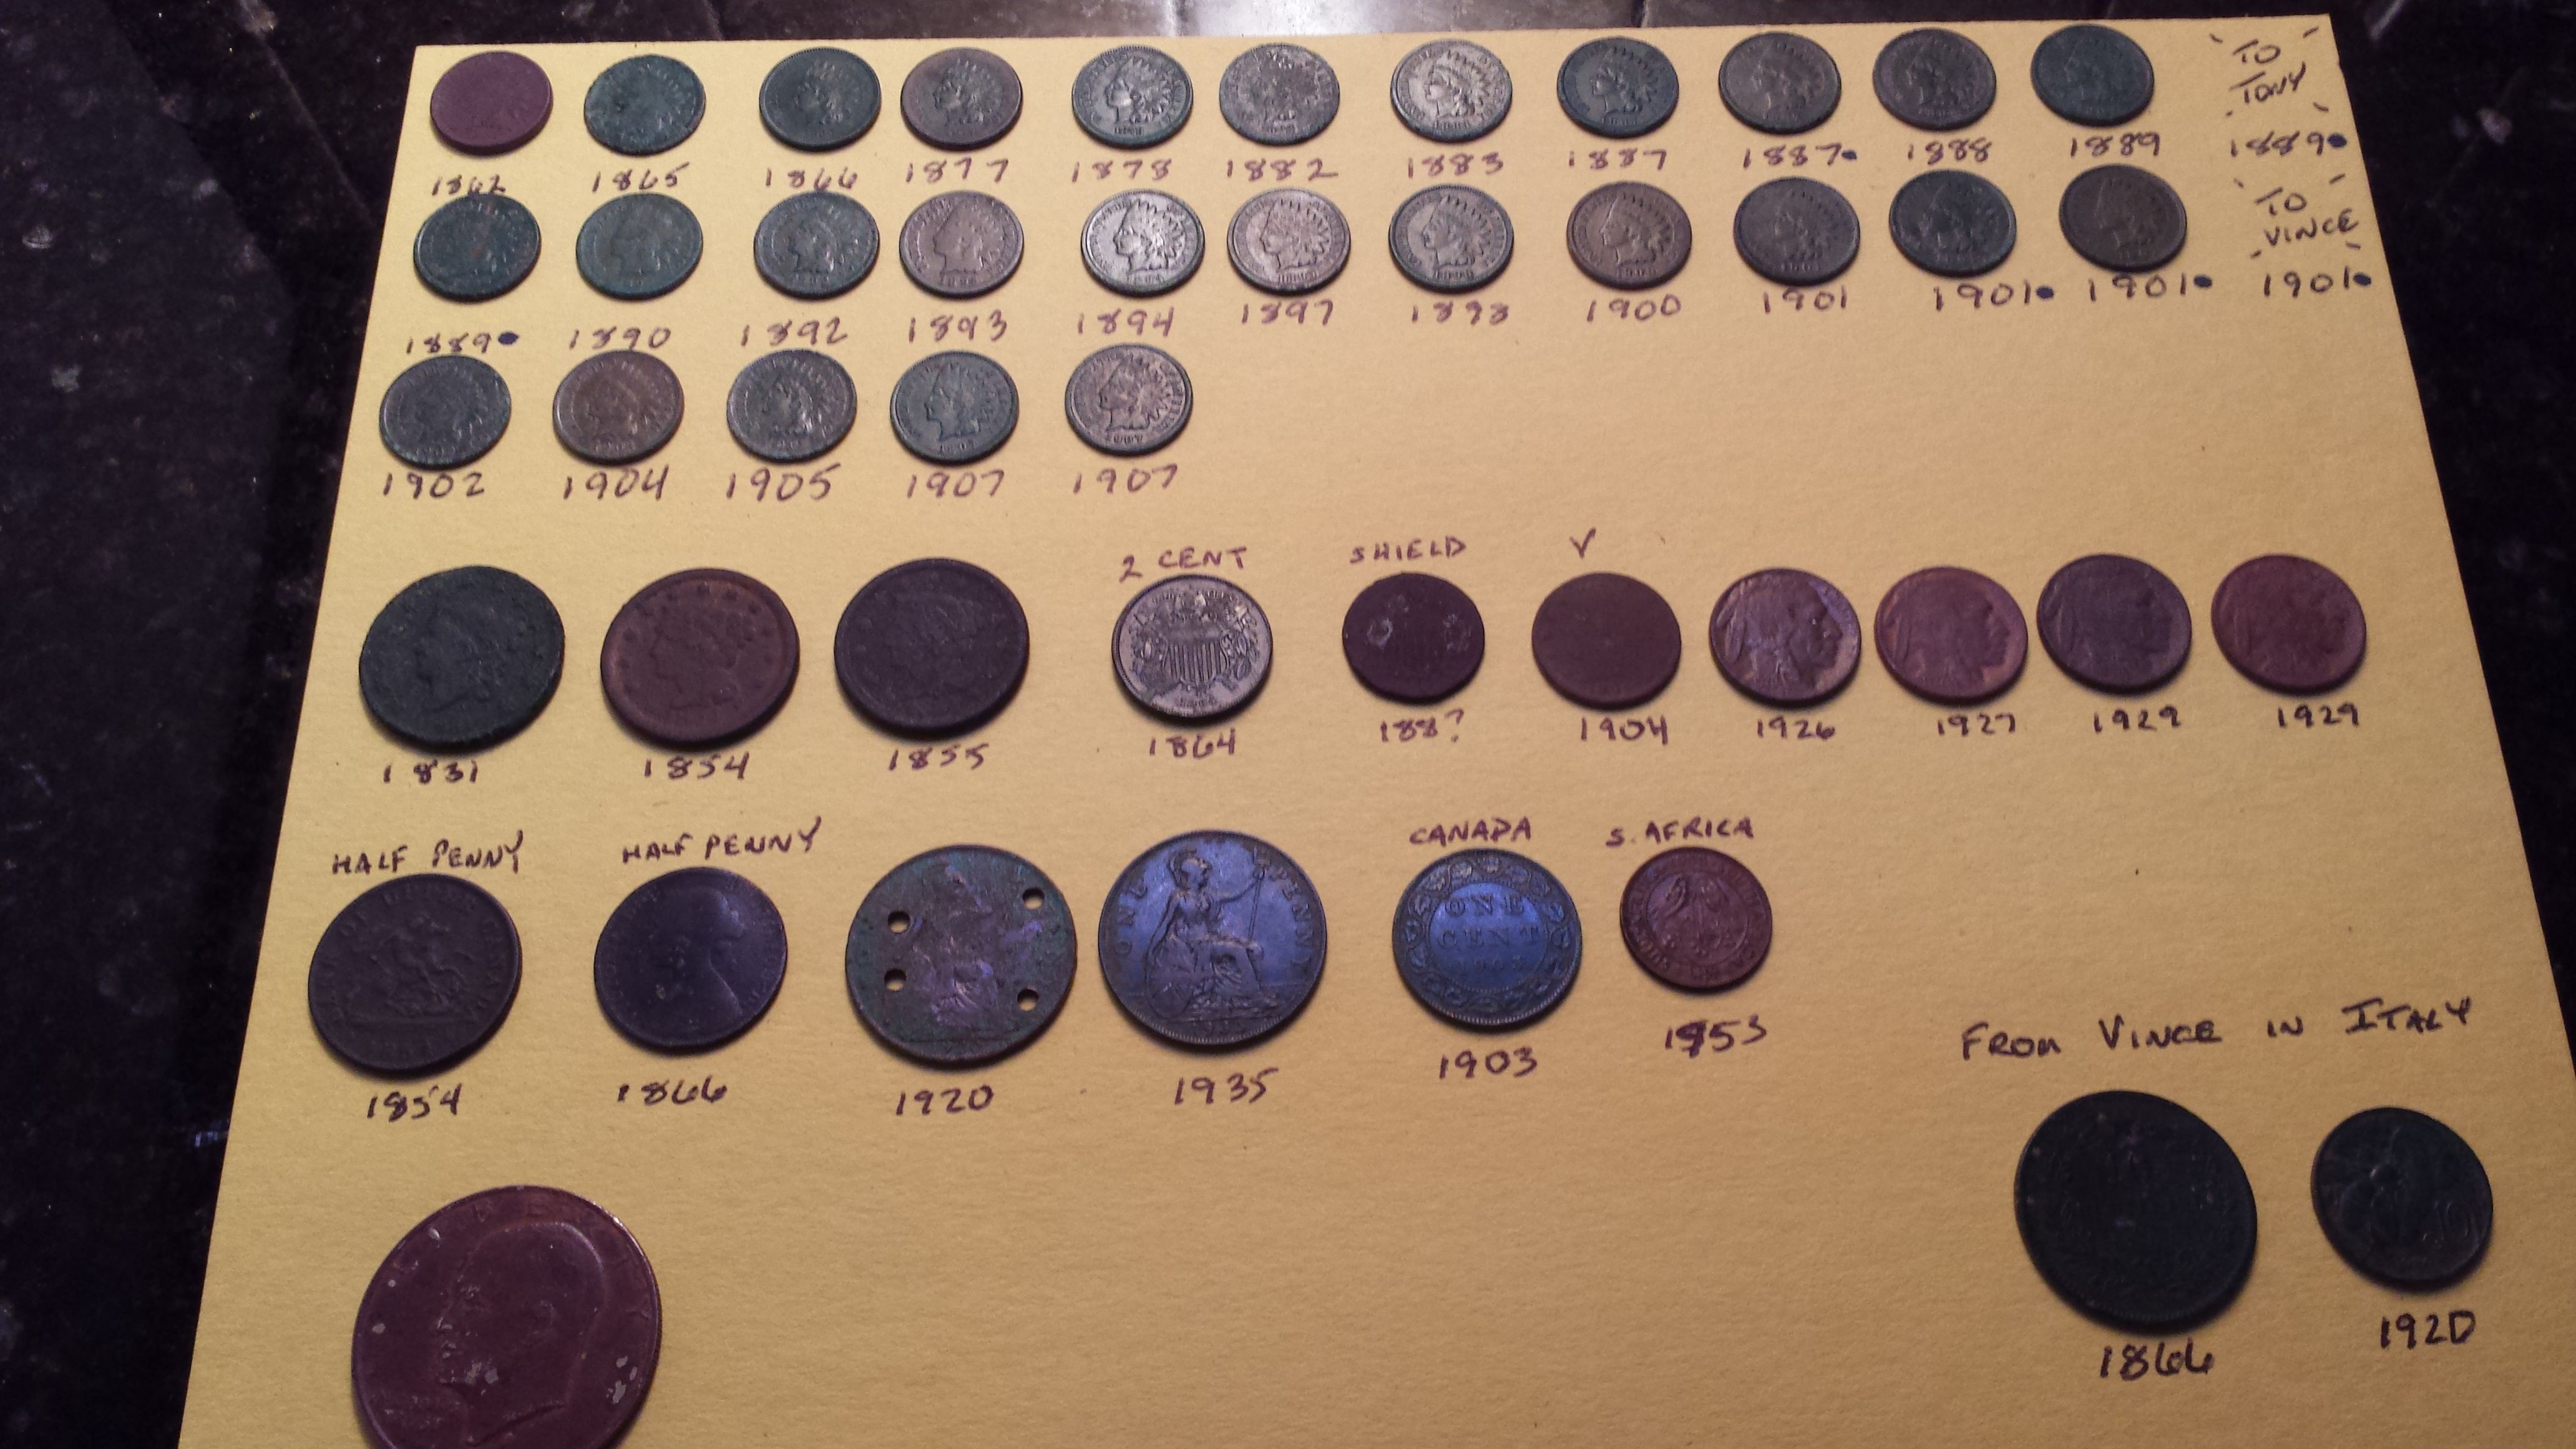 20160104 070616  Best of 2015 IHPs, Old US coins. Foreign coins, Ike, & Coins from Vince76